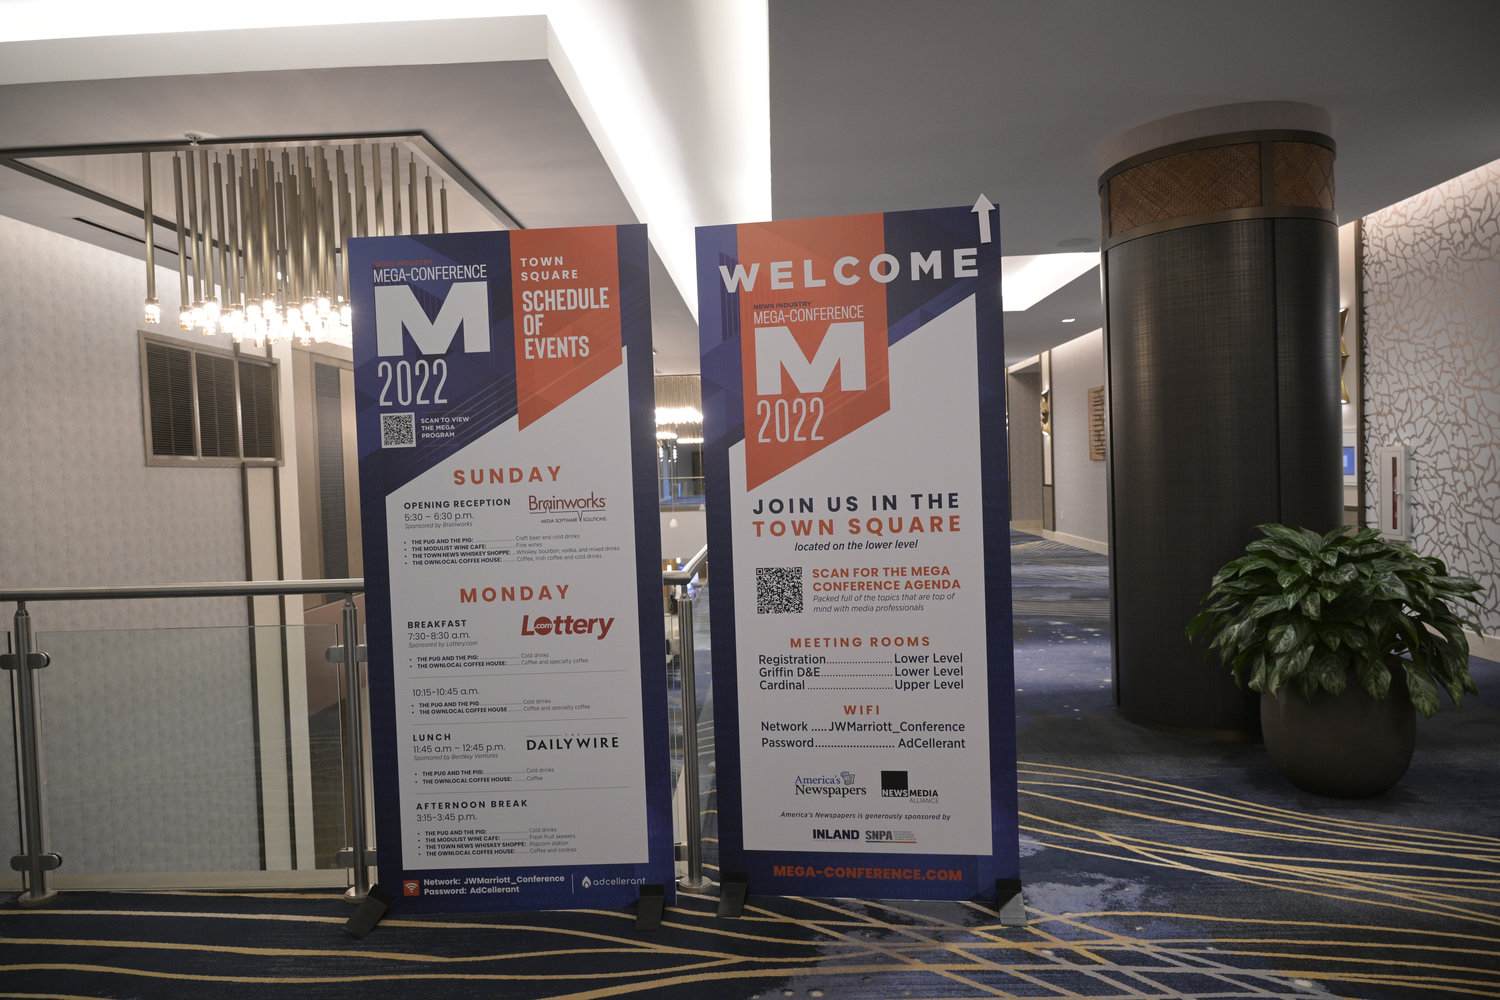 Two full days of programming, plus the opportunity to network in person again, drew more than 350 industry executives to Orlando for the Mega-Conference. Thank you to our speakers, sponsors, exhibitors and to all of the attendees who made #2022MegaConf such a success! (Photo by Phelan M. Ebenhack)